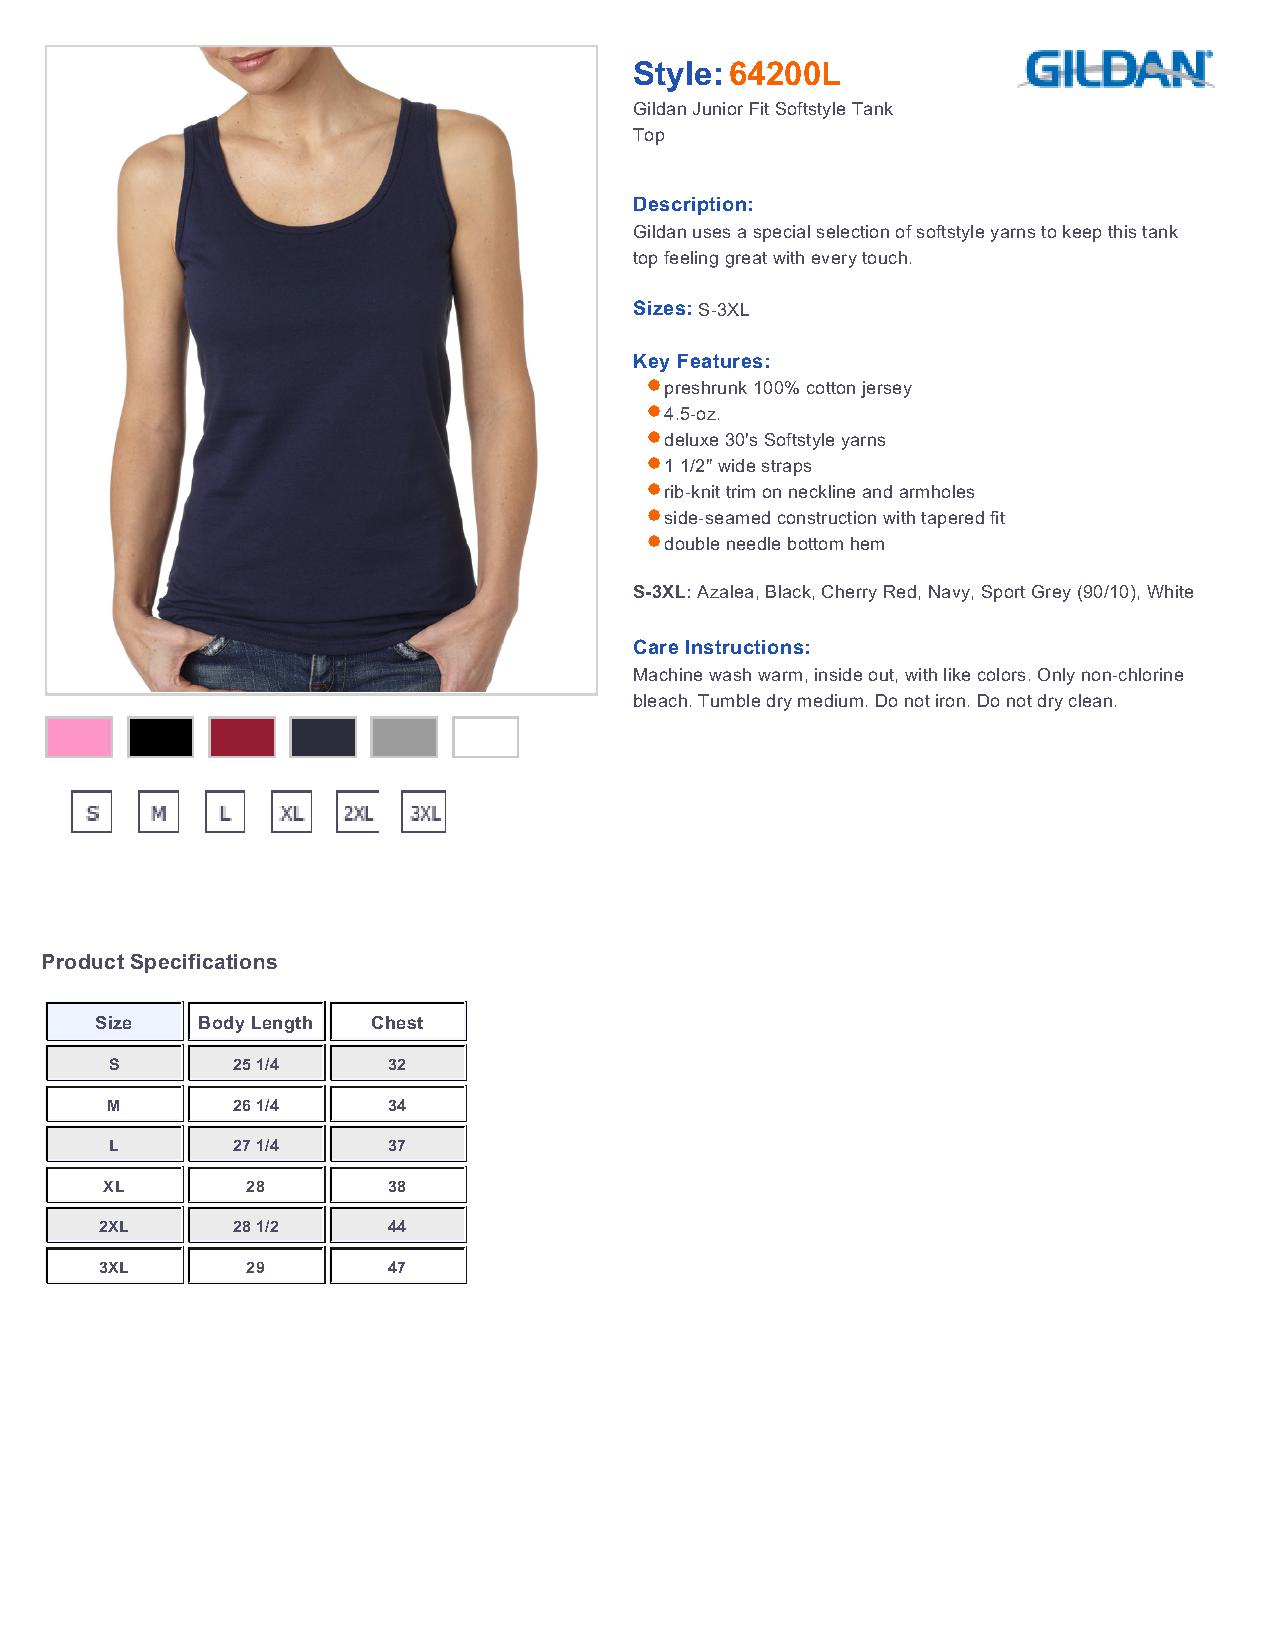 Gildan 64200L - Softstyle Junior Fit Tank Top $5.66 - Youth's Tanks